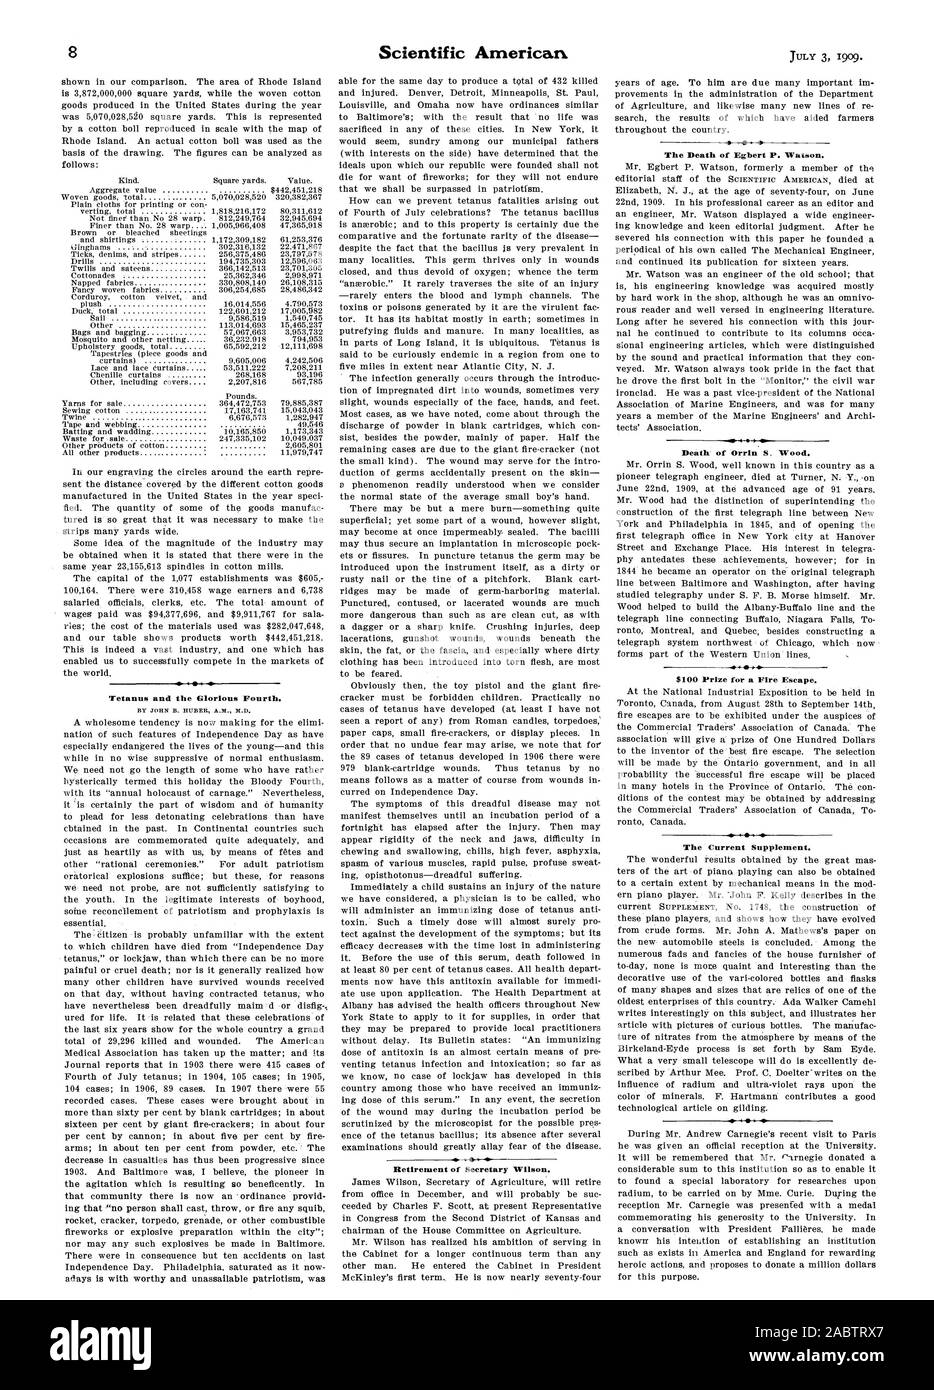 Tetanus and the Glorious Fourth. BY JOHN B. HUBER A.M. M.D. Retirement of Secretary Wilson. The Death of Egbert P. Watson. Death of Orrin S. Wood. The Current Supplement., scientific american, -1909-07-03 Stock Photo